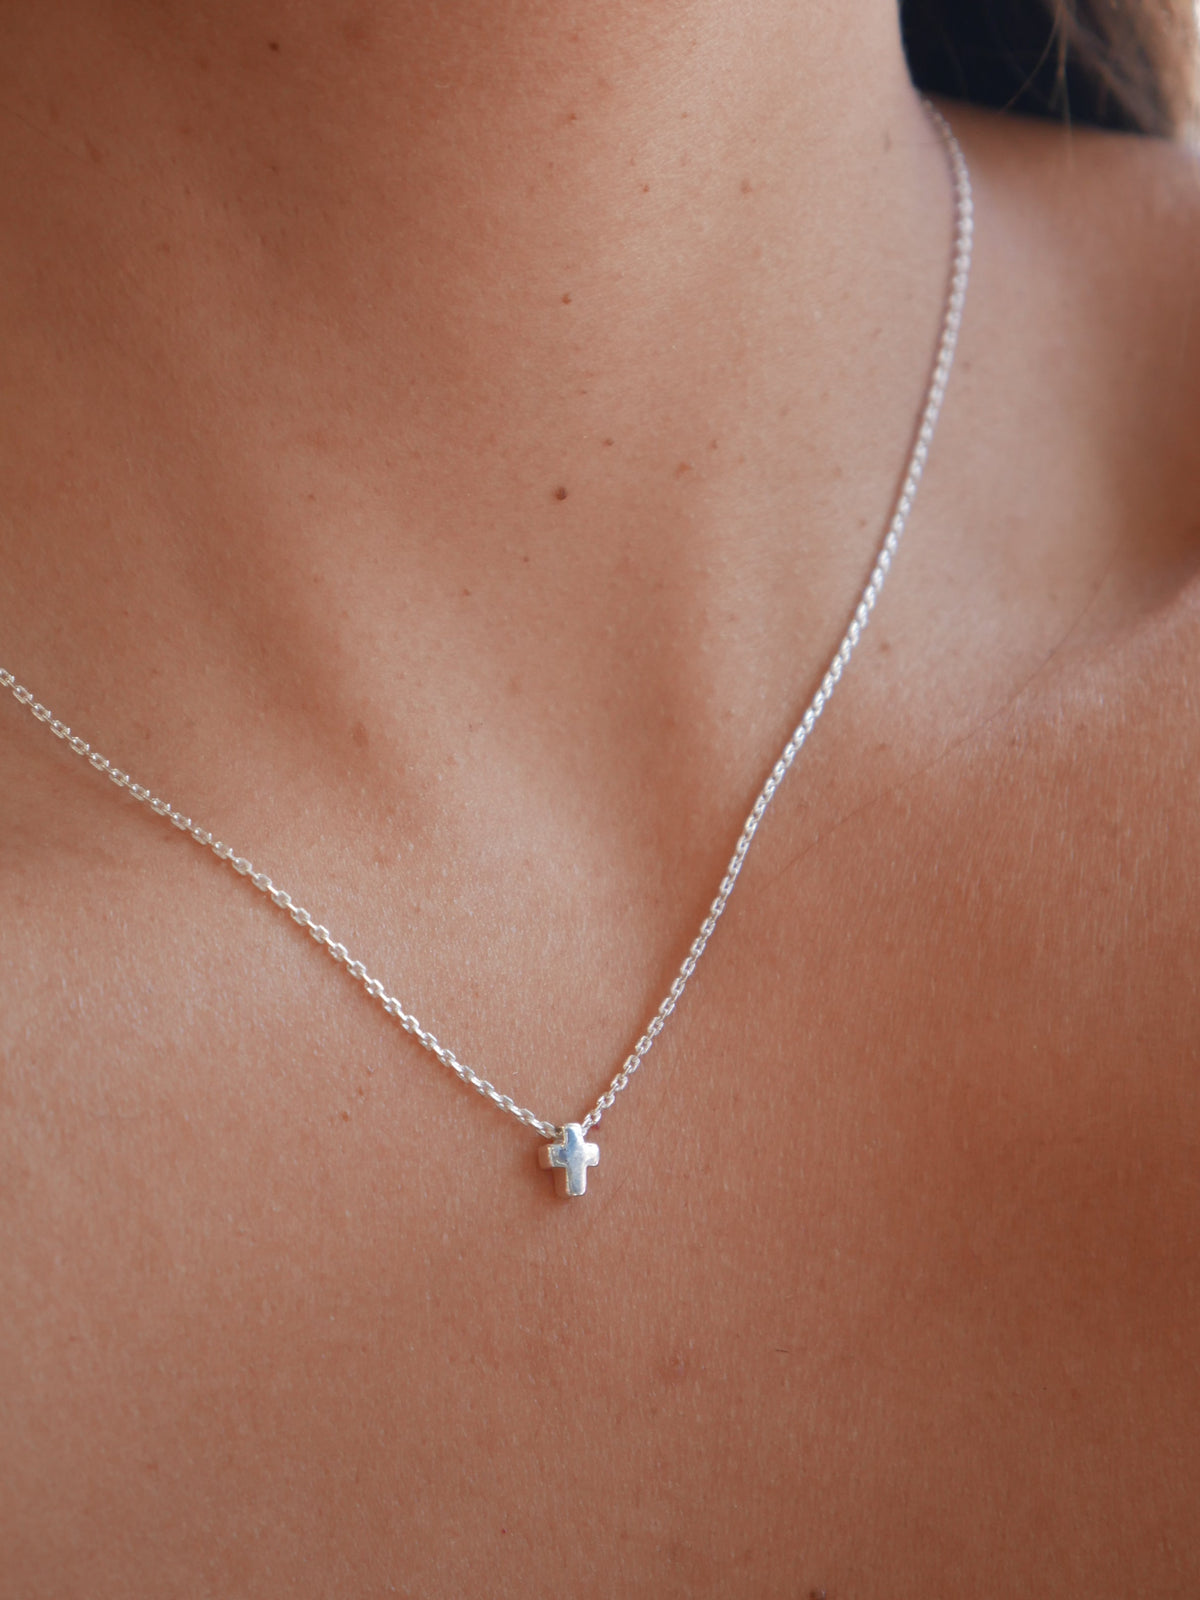 cross necklace, unique, sterling silver, waterproof dainty cross necklaces, tiny, minimal plain crosses .925 sterling silver, influencer style Kesley Boutique